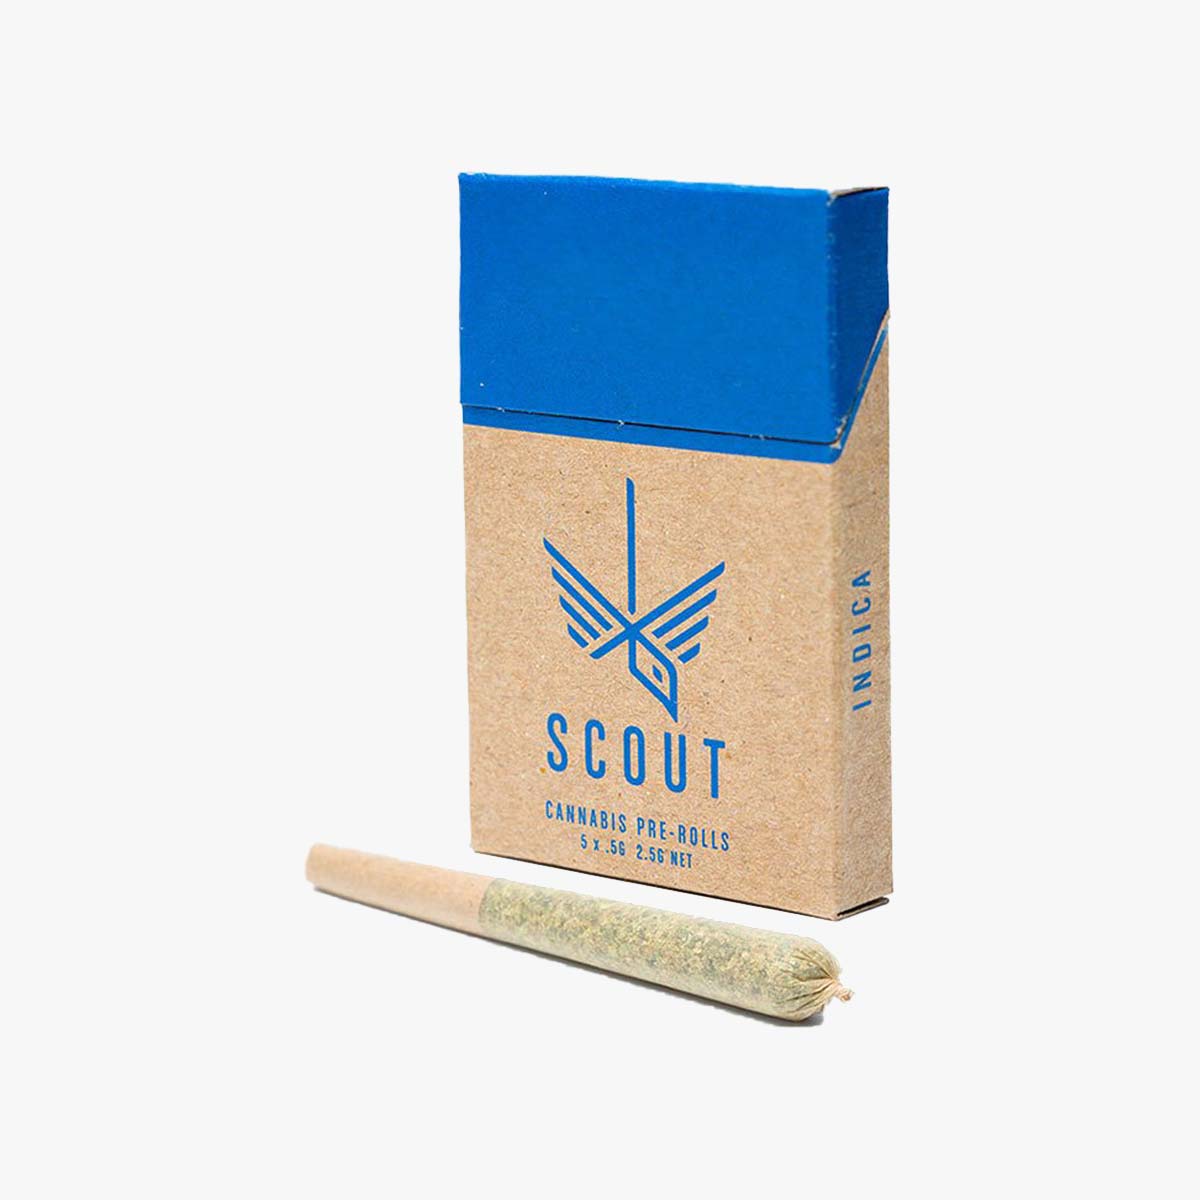 Custom Pre-rolled boxes